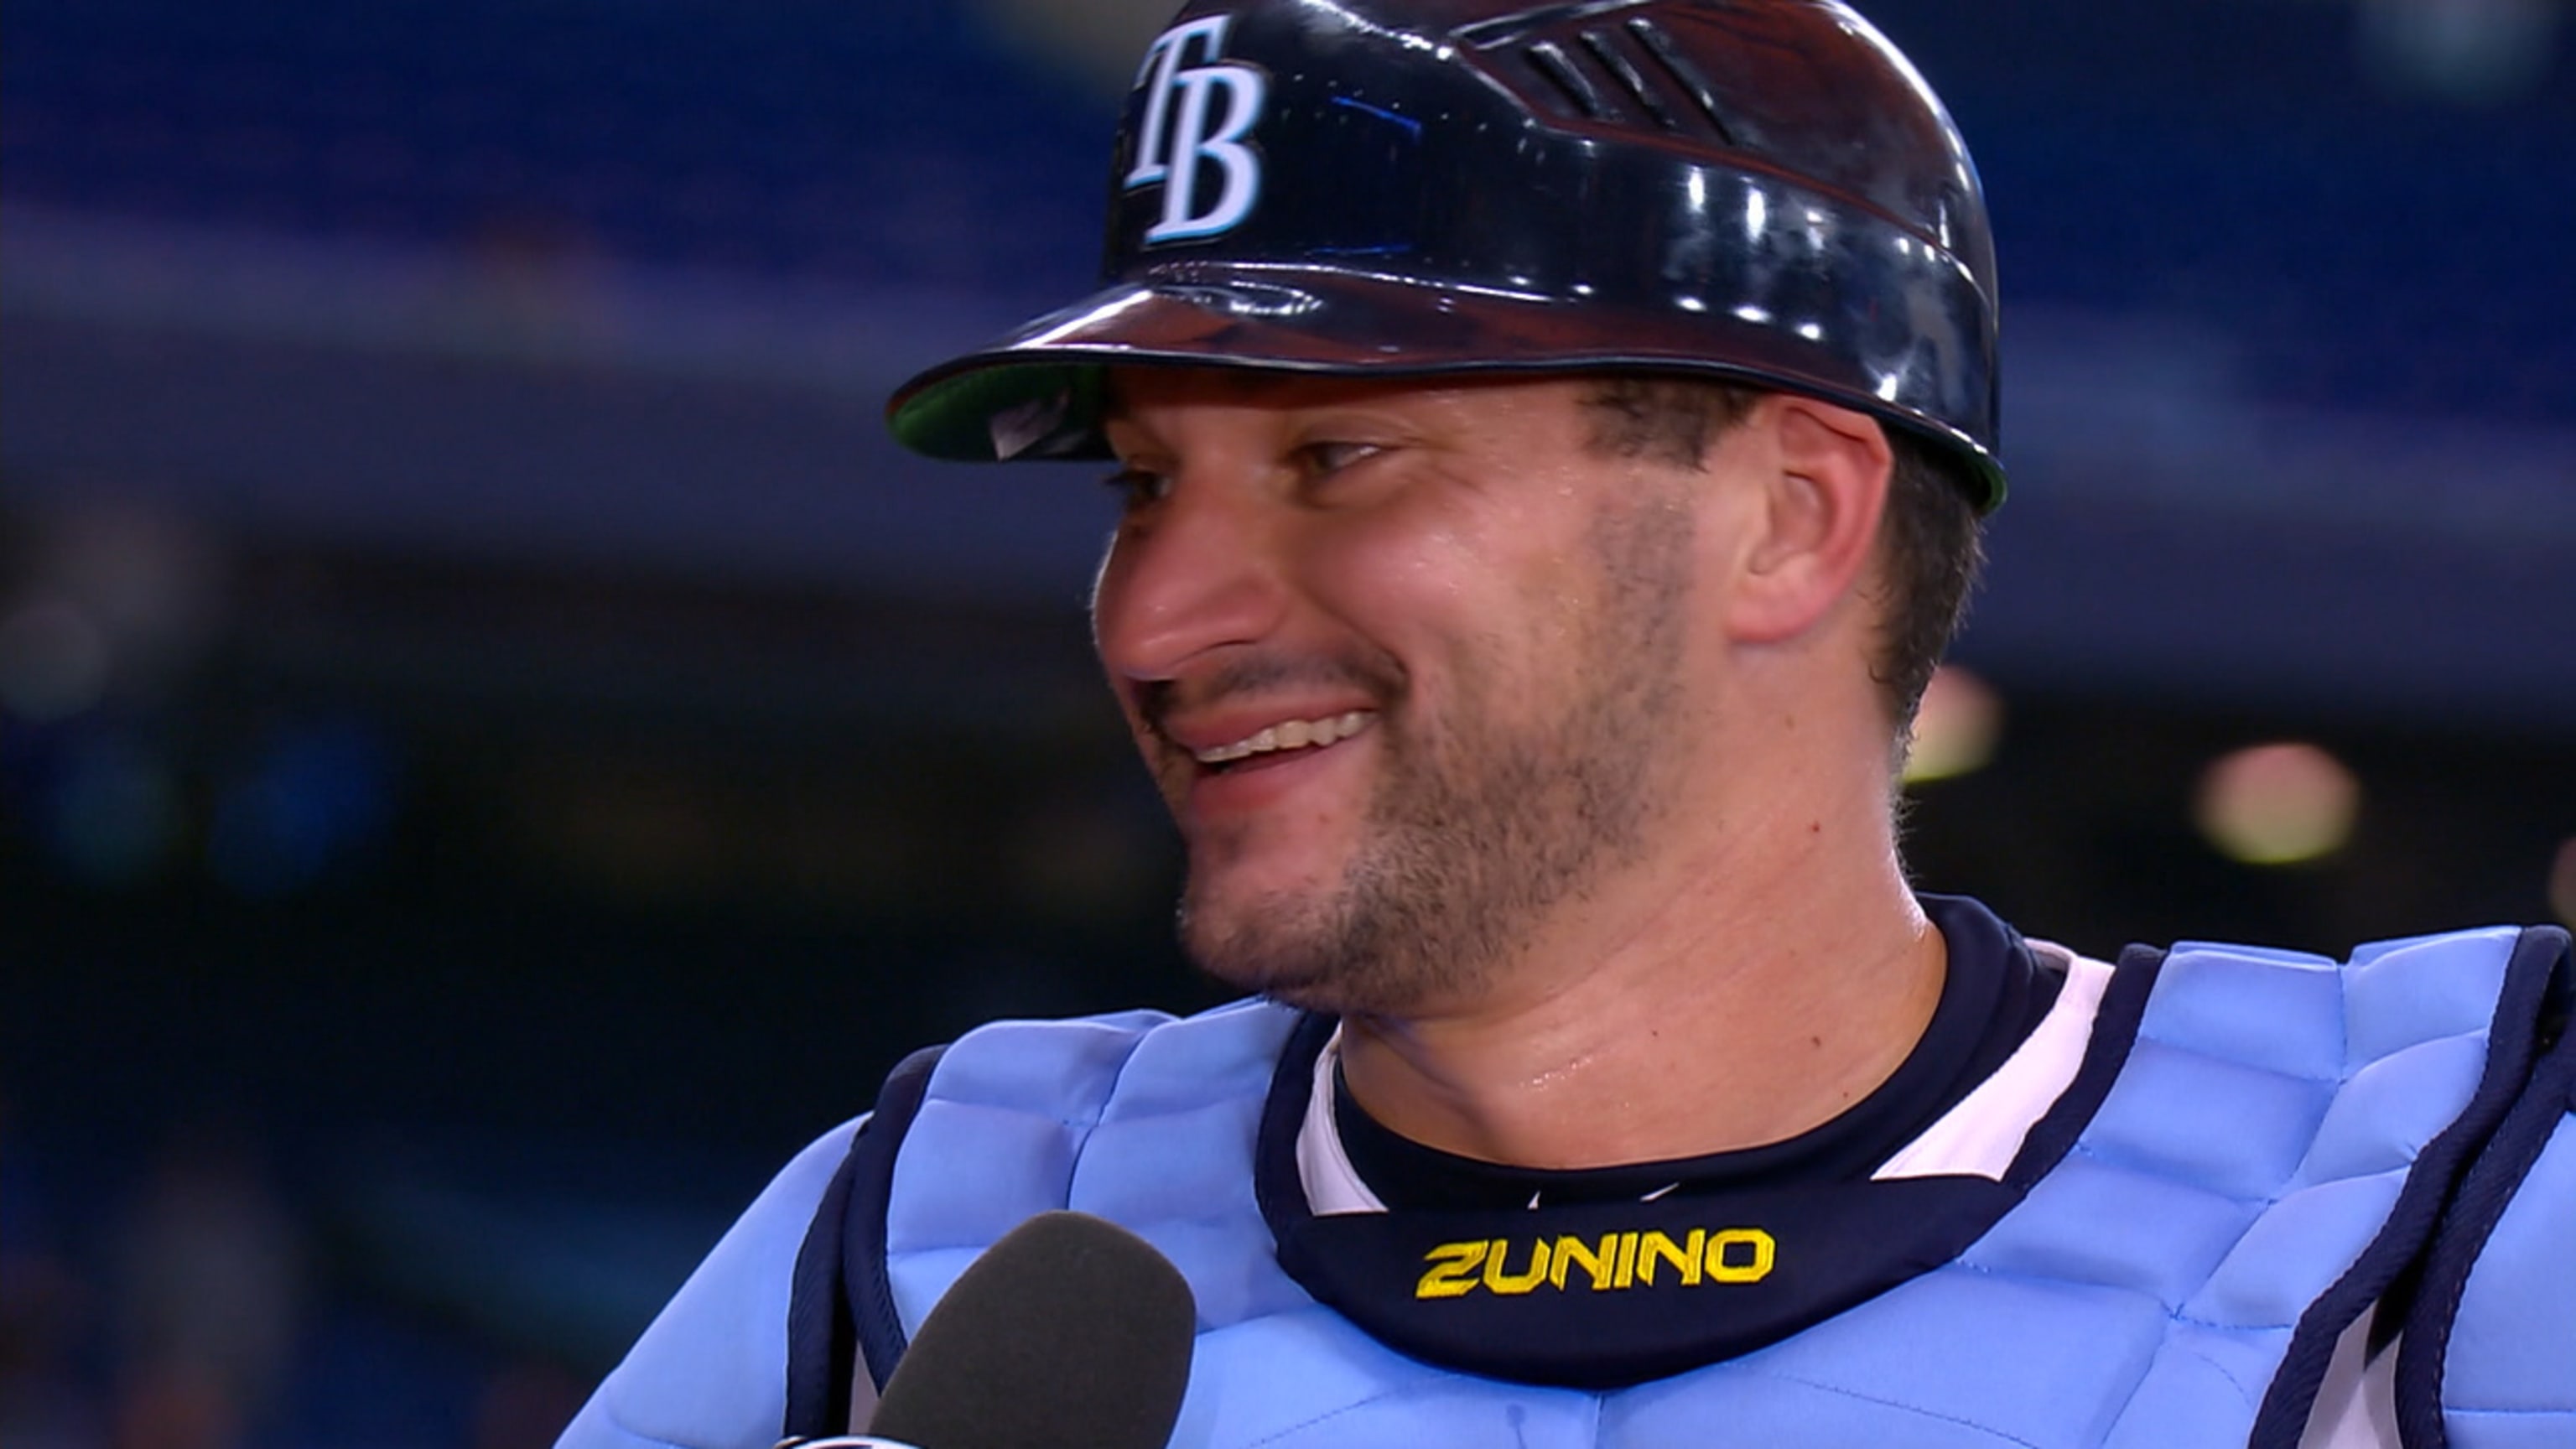 Mike Zunino hits year's 1st homer after son's birth